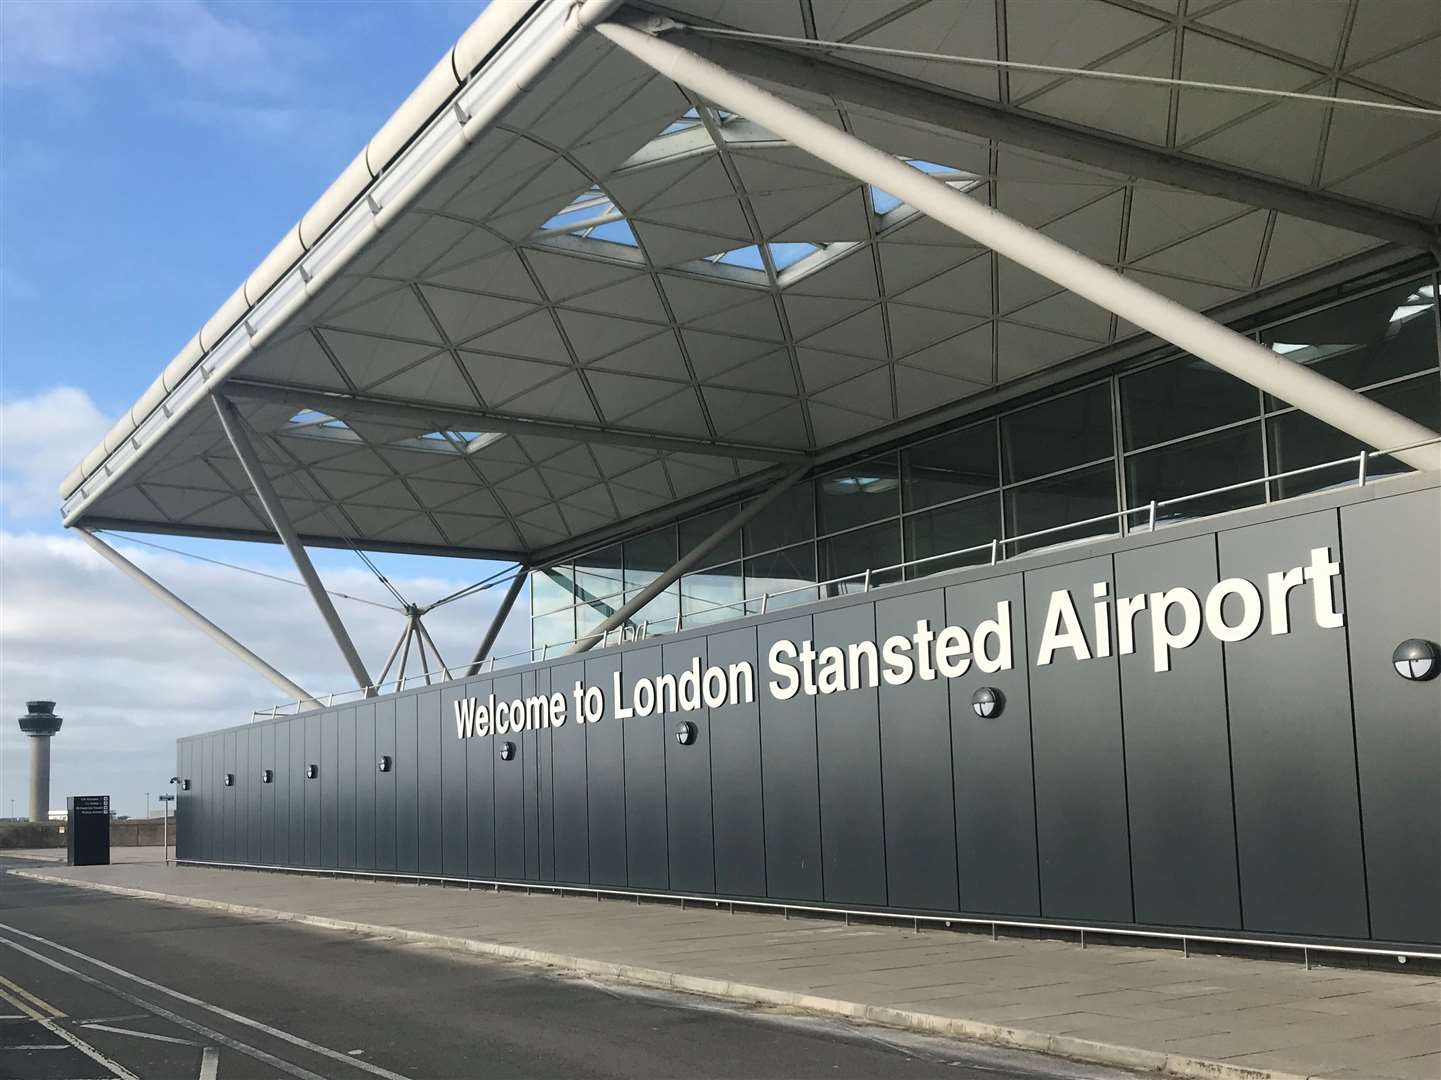 The offence is said to have taken place at Stansted Airport